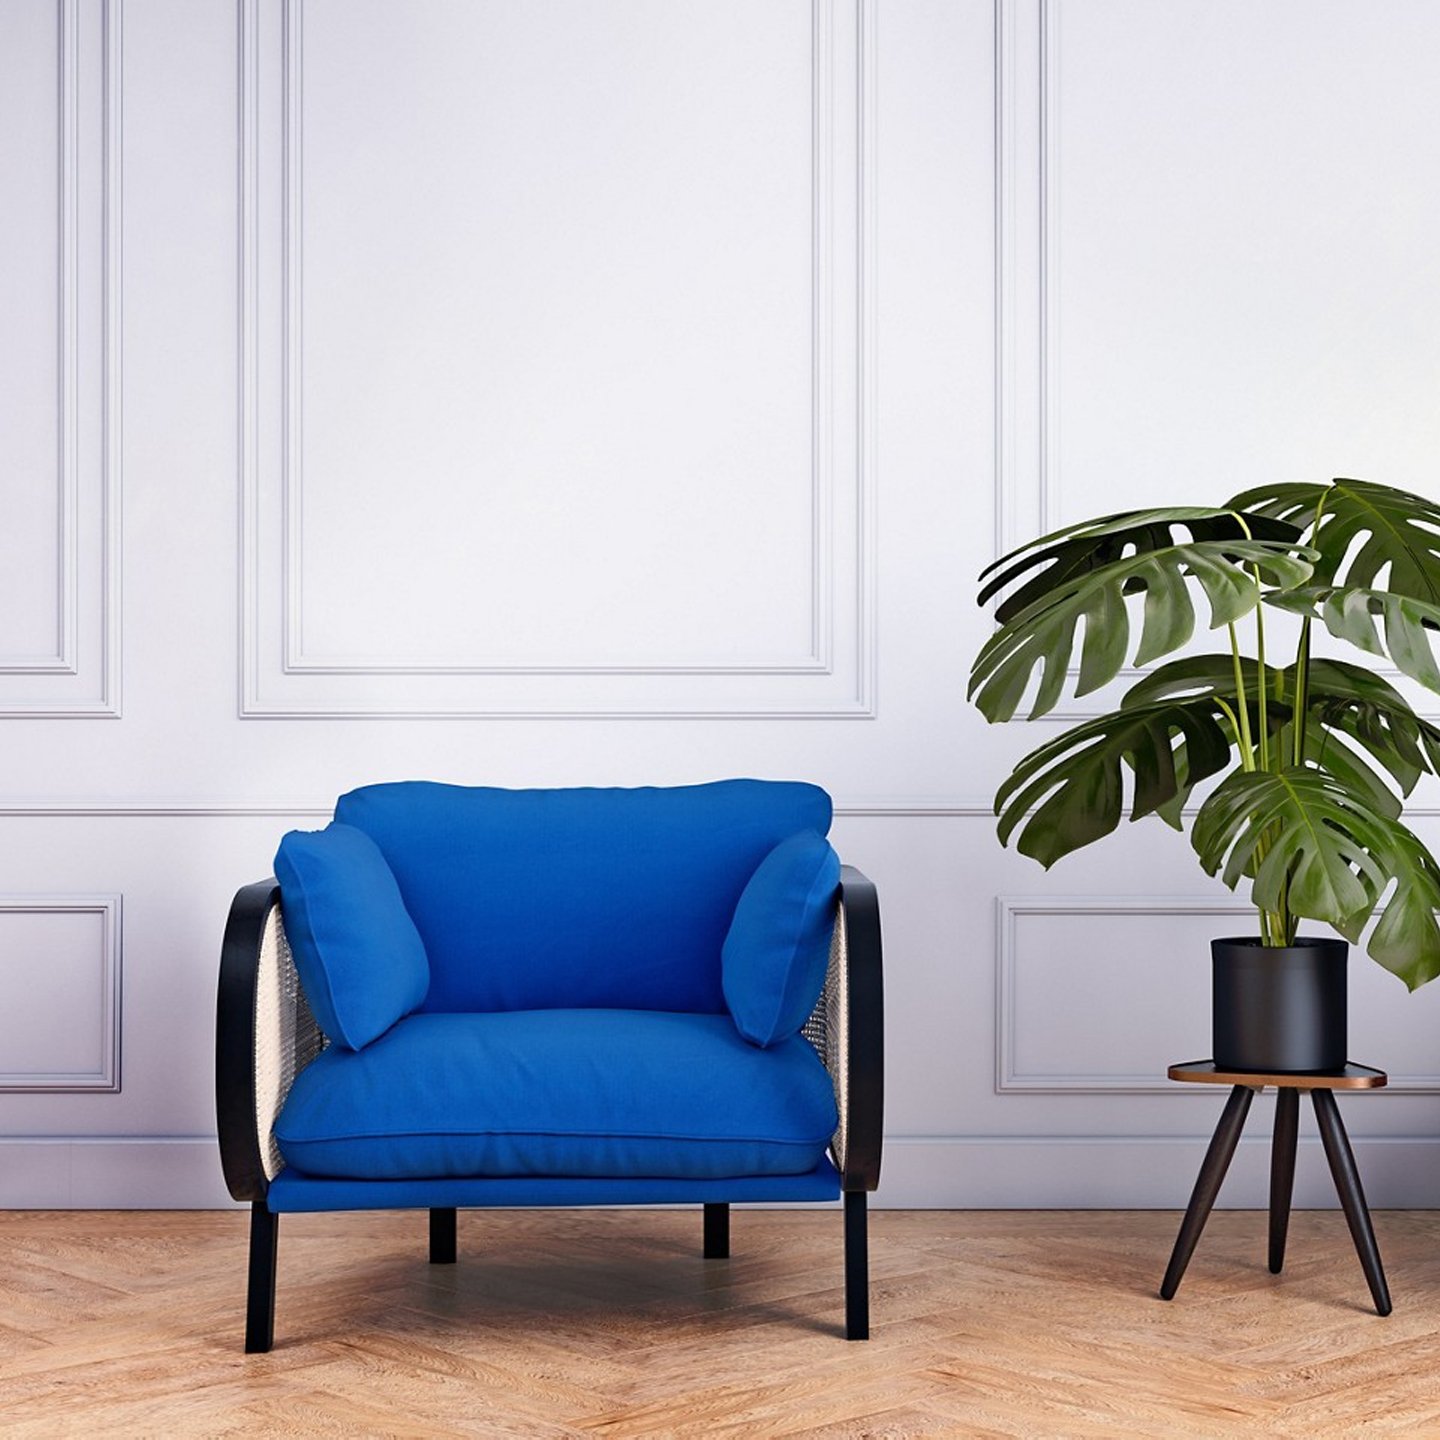 Haworth Buzzicane lounge chair in blue color in a lobby area next to a potted plant